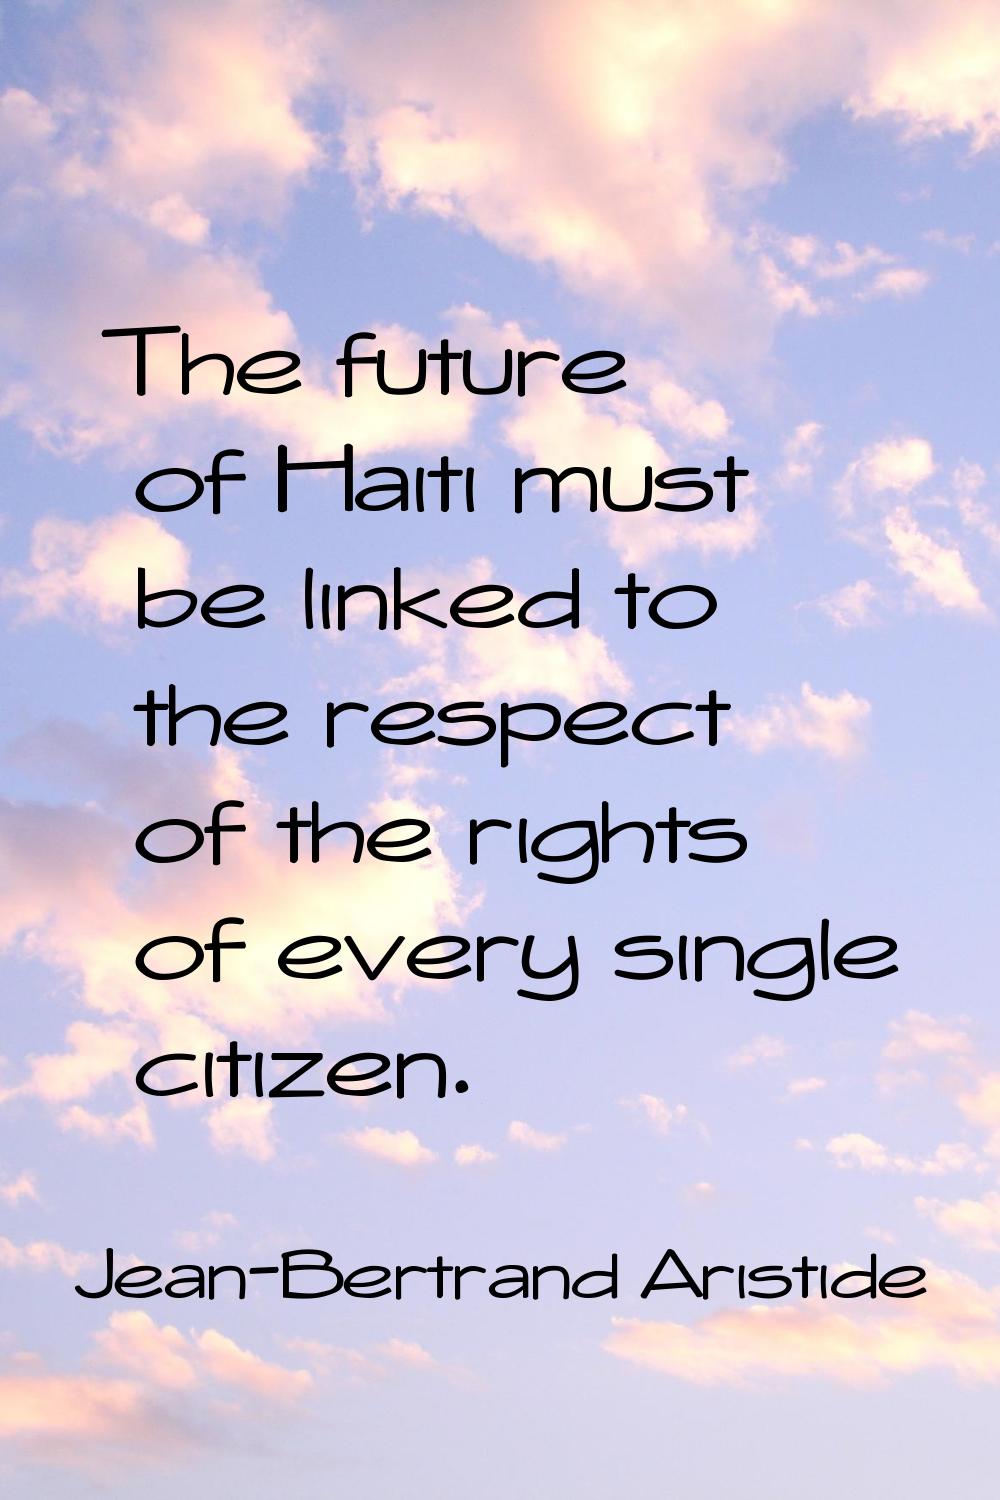 The future of Haiti must be linked to the respect of the rights of every single citizen.